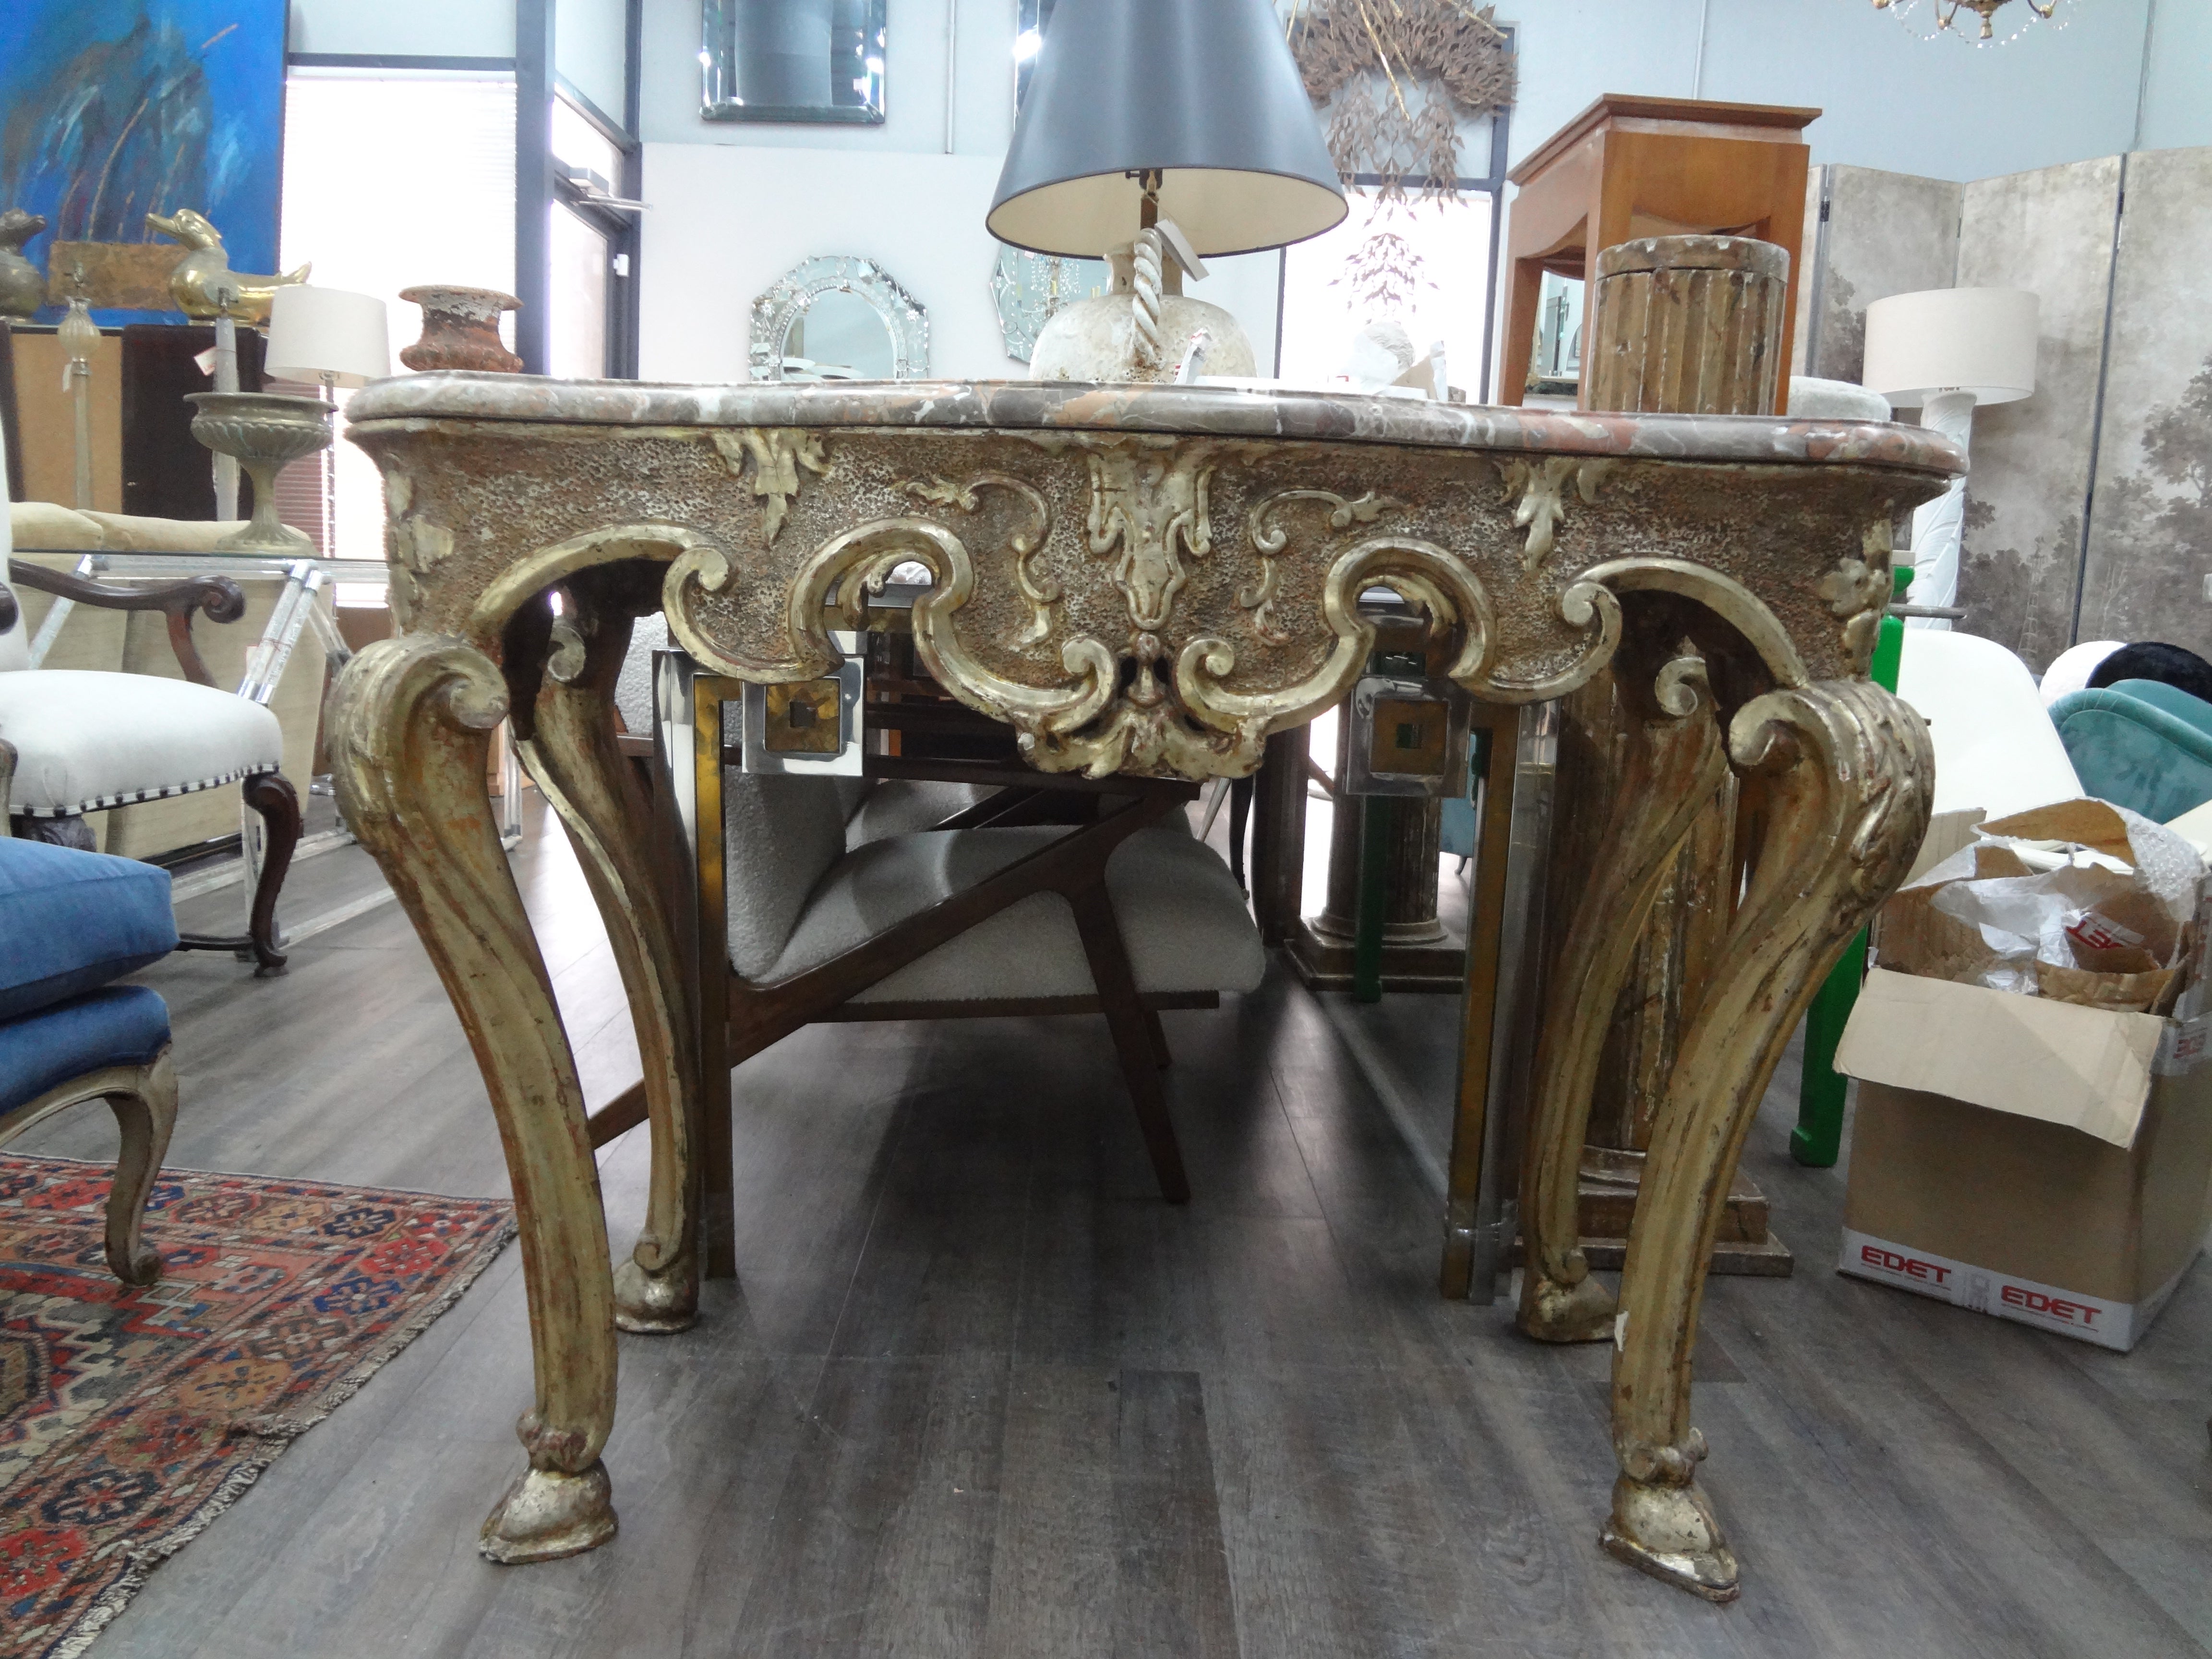 17th Century Italian Giltwood Console Table From Naples.
This stunning antique Italian Neapolitan gilt wood console is free standing and would make a grand statement in an entrance hall, living area or dining room.
Great patina!